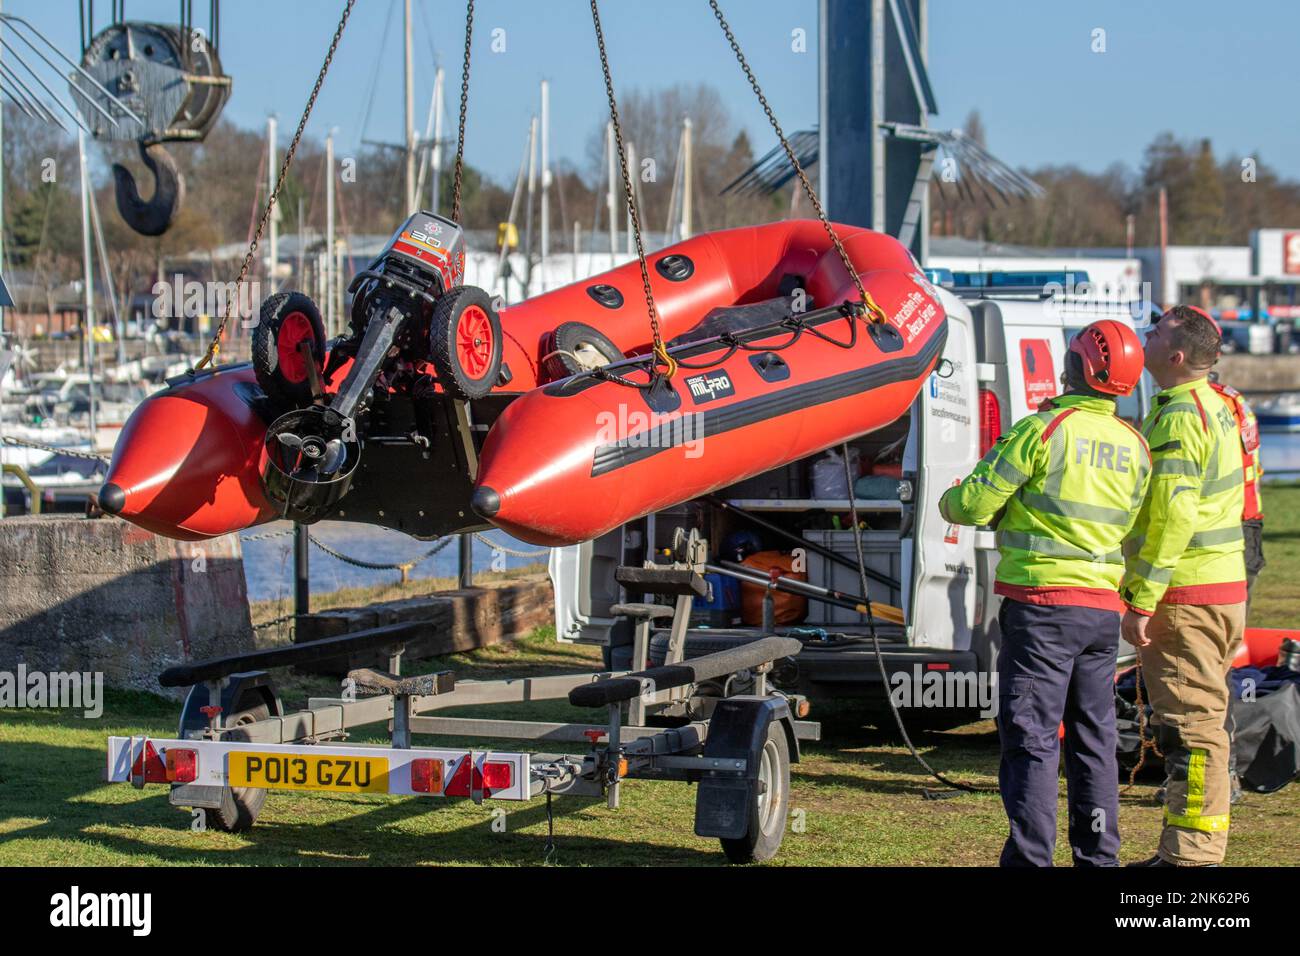 Lancashire Fire and Emergency Rescue Team on a training day at Maritime Way, Preston Docks. The full-time Fire Crew who work 2 days on, & 2 nights on per week, practice and hone their skills by launching a Zodiac MILPRO Rib boat at Preston Docks, Riversway, UK Stock Photo